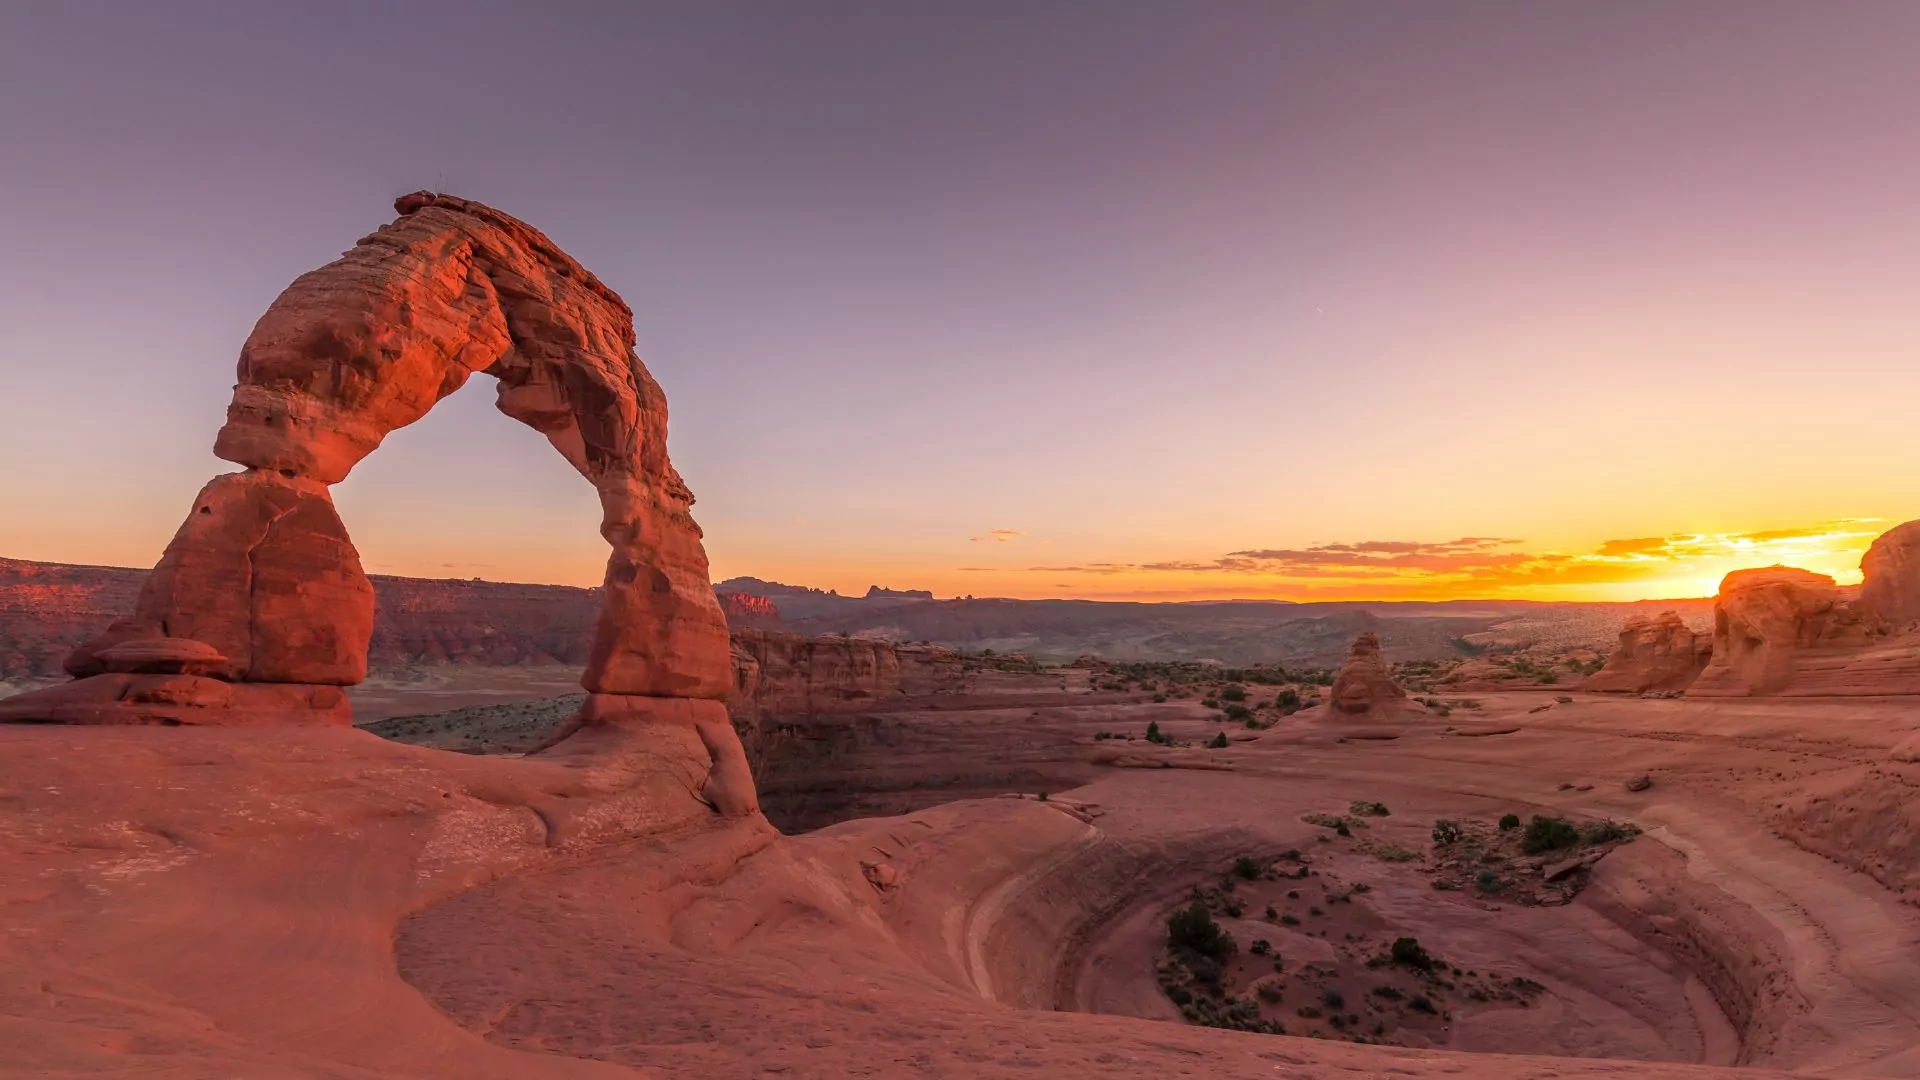 Delicate Arch in Arches National Park dominates the sunrise skyline